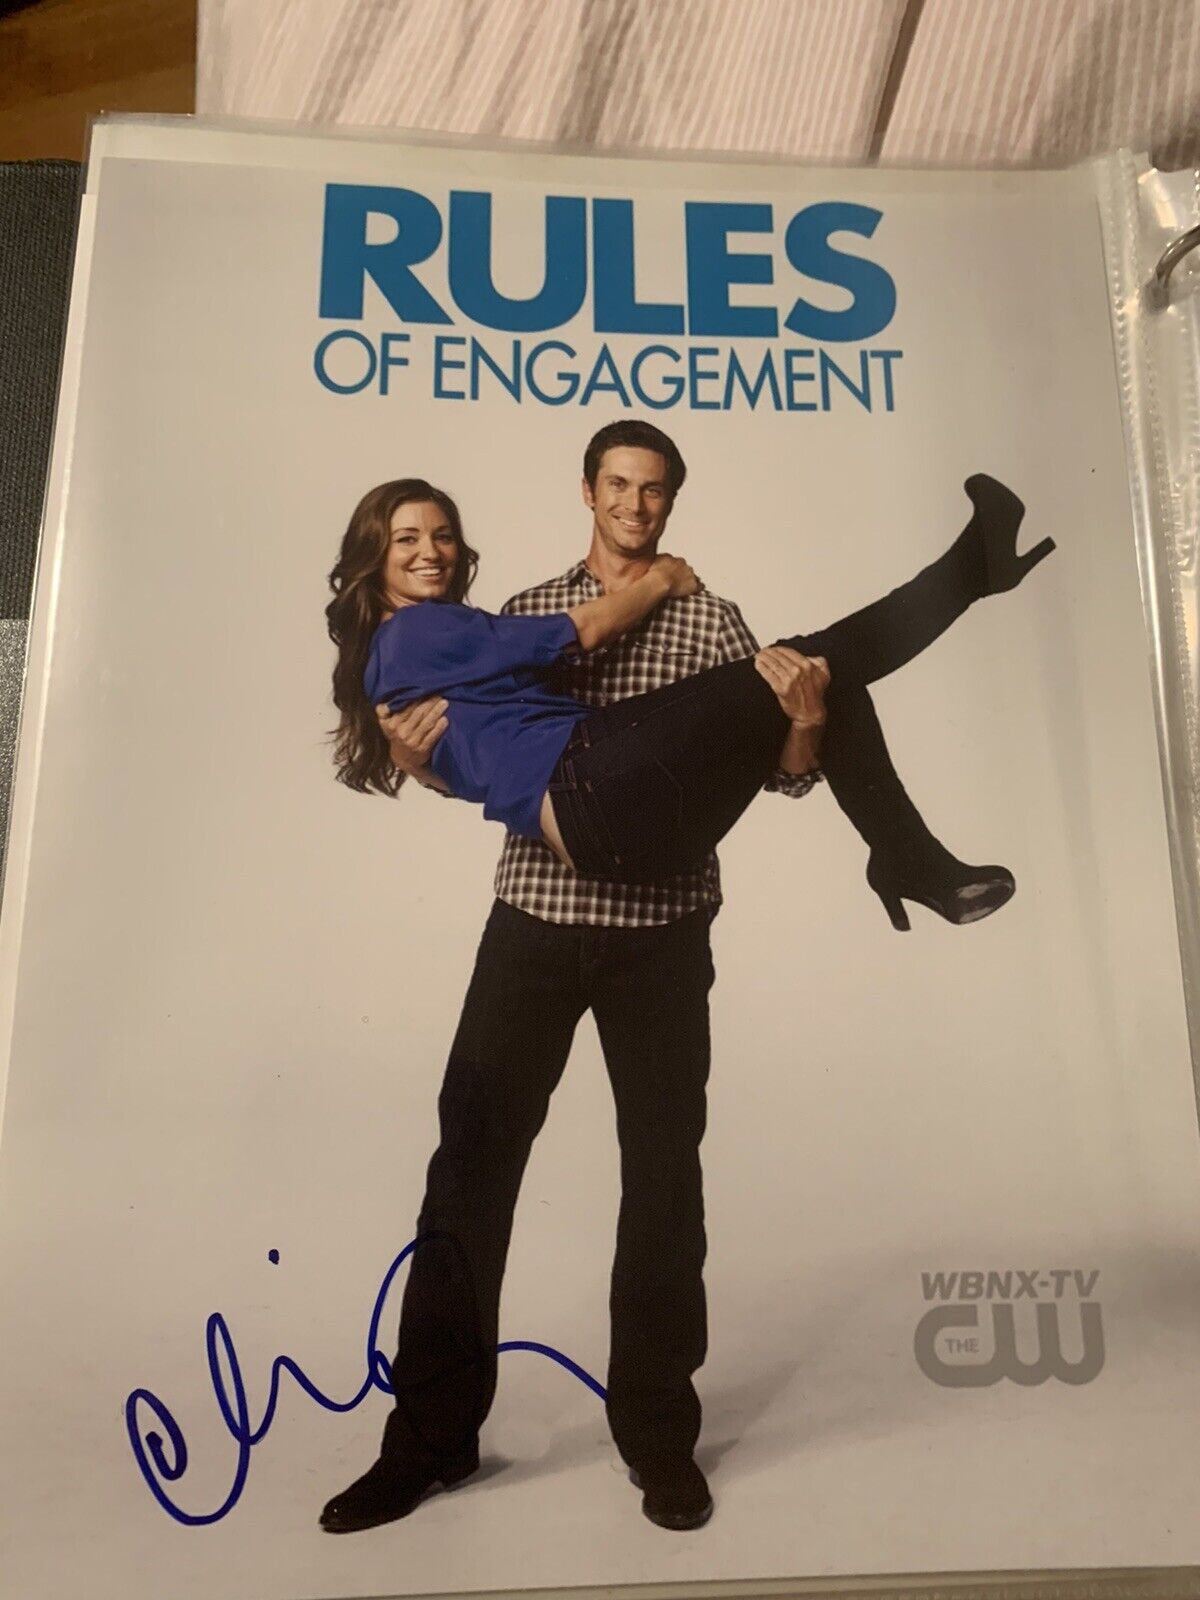 Oliver Hudson Signed Auto 8x10 Photo Poster painting Pic Rules Of Engagement